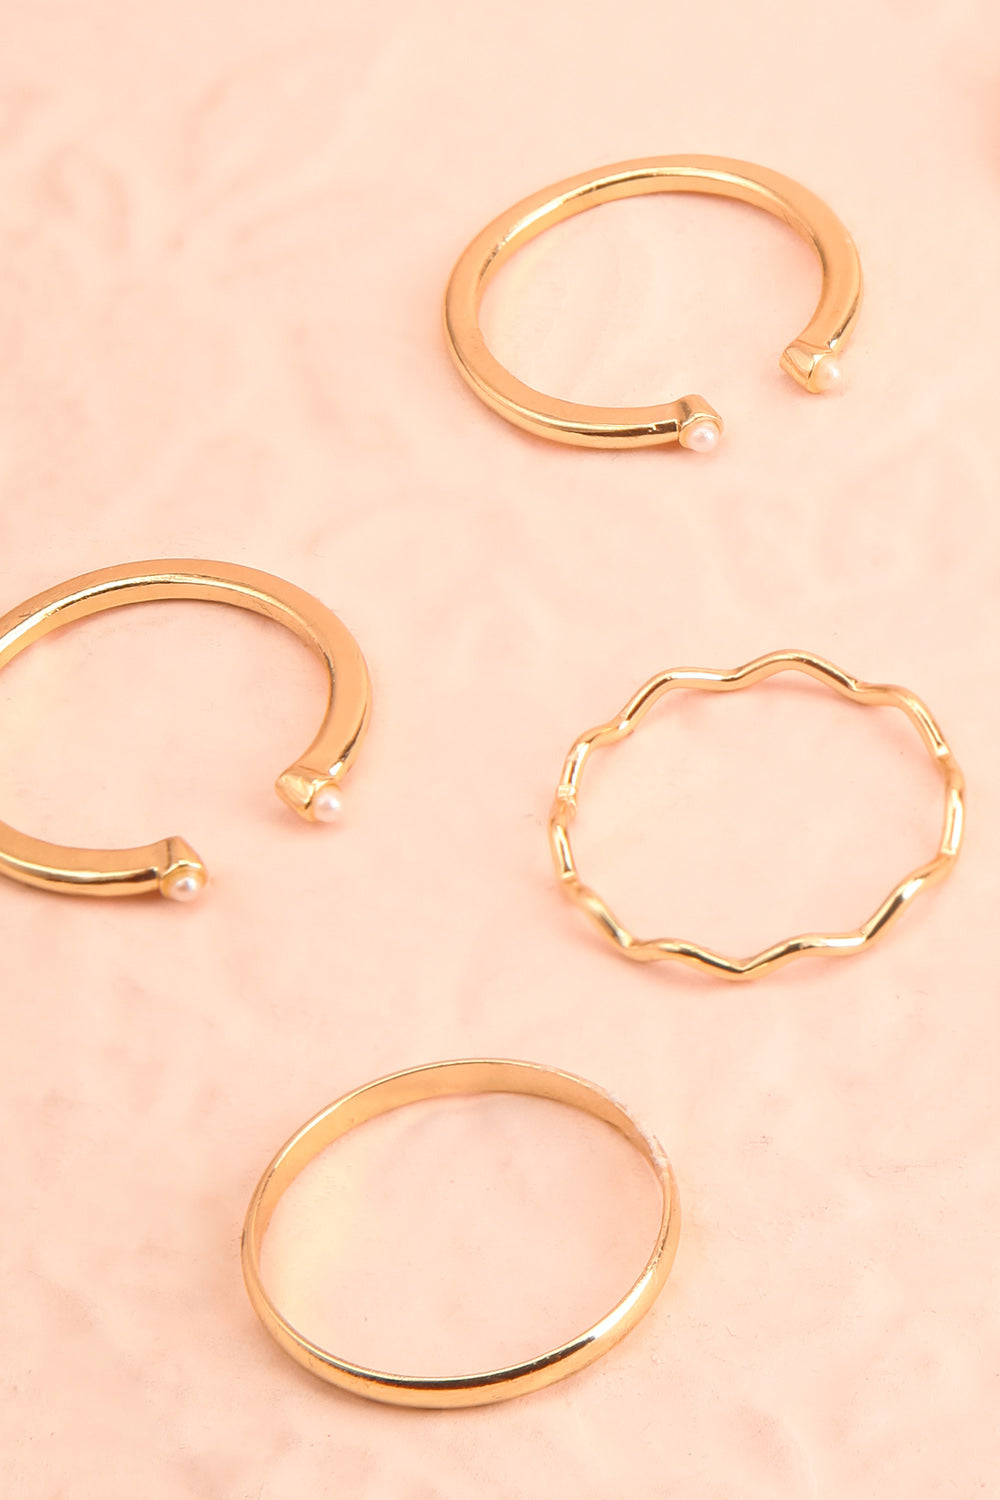 Balbina Set of 9 Assorted Rings | Boutique 1861 details